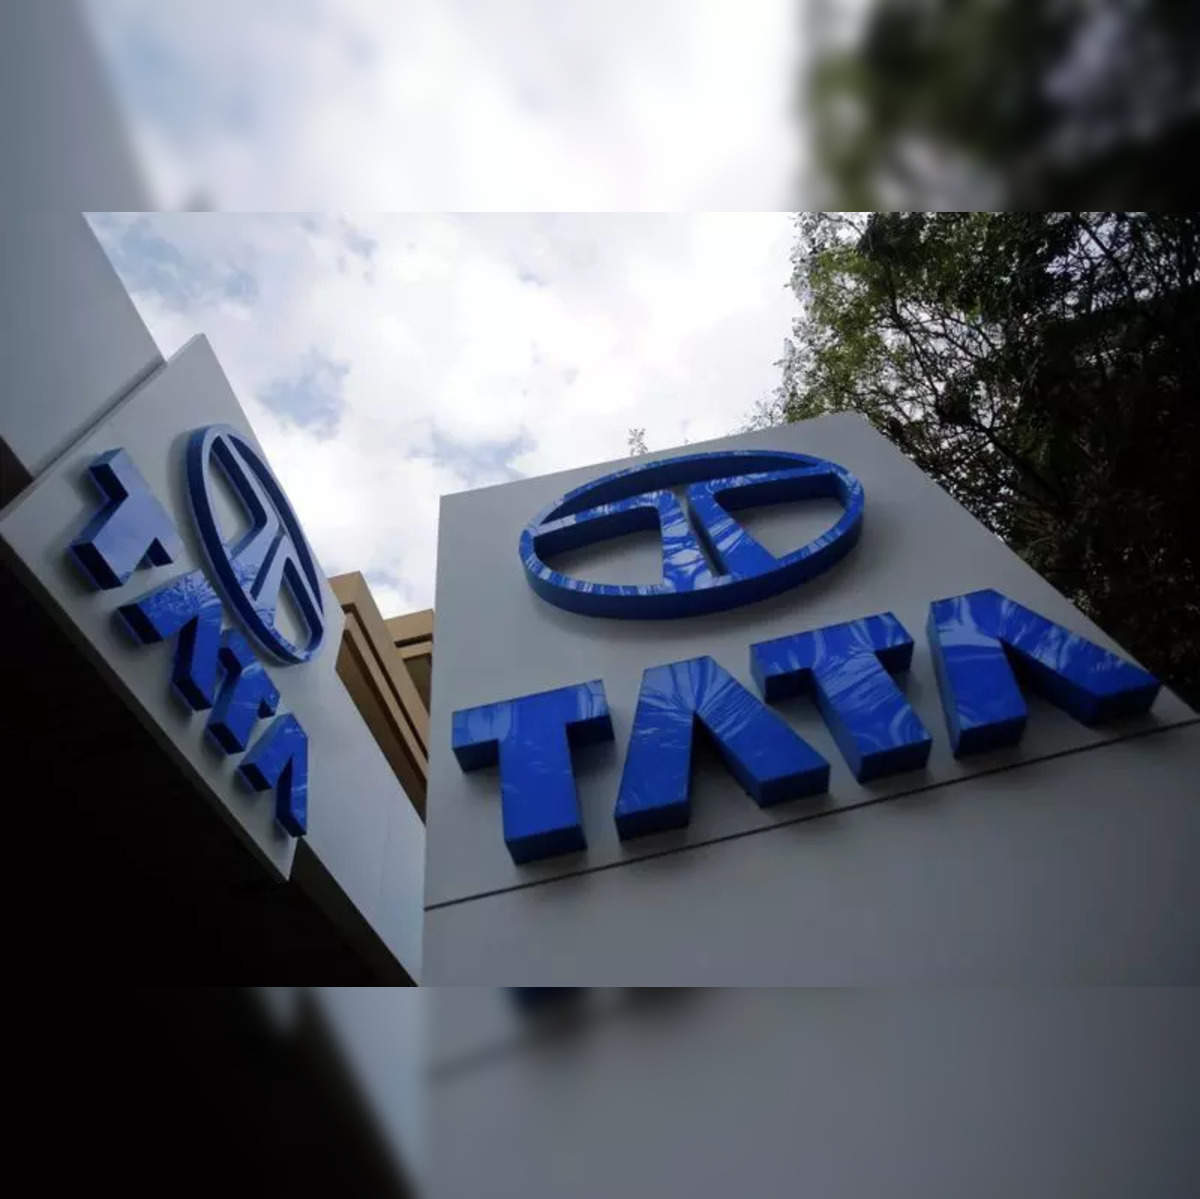 tata 1mg deal: After BigBasket, Tata Digital acquires online pharmacy 1mg -  The Economic Times